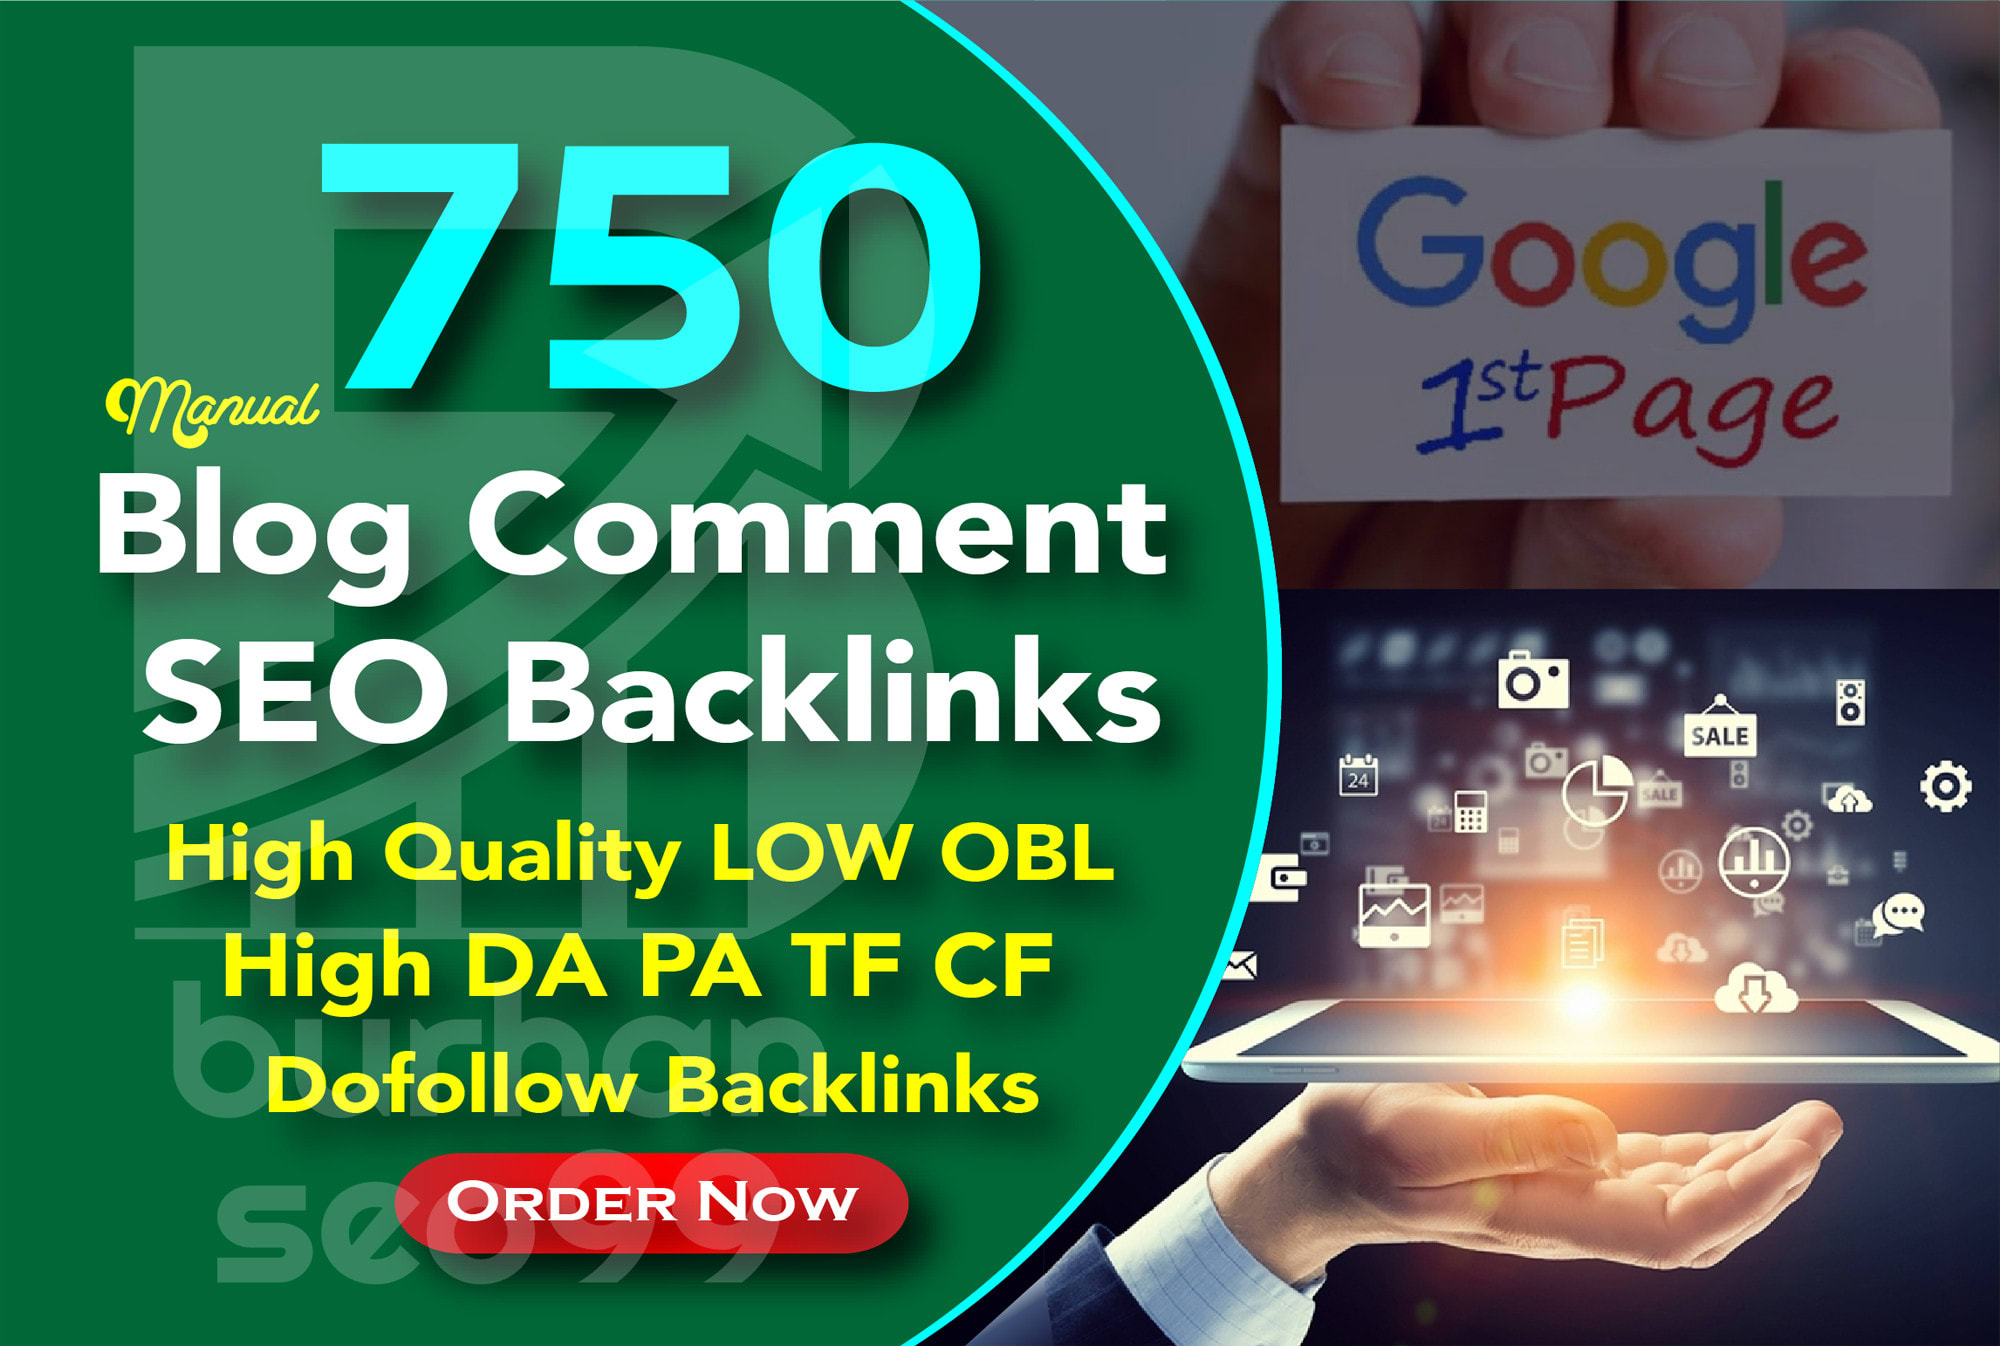 I Will Post 750 Comments on LOW OBL Backlnks Manually